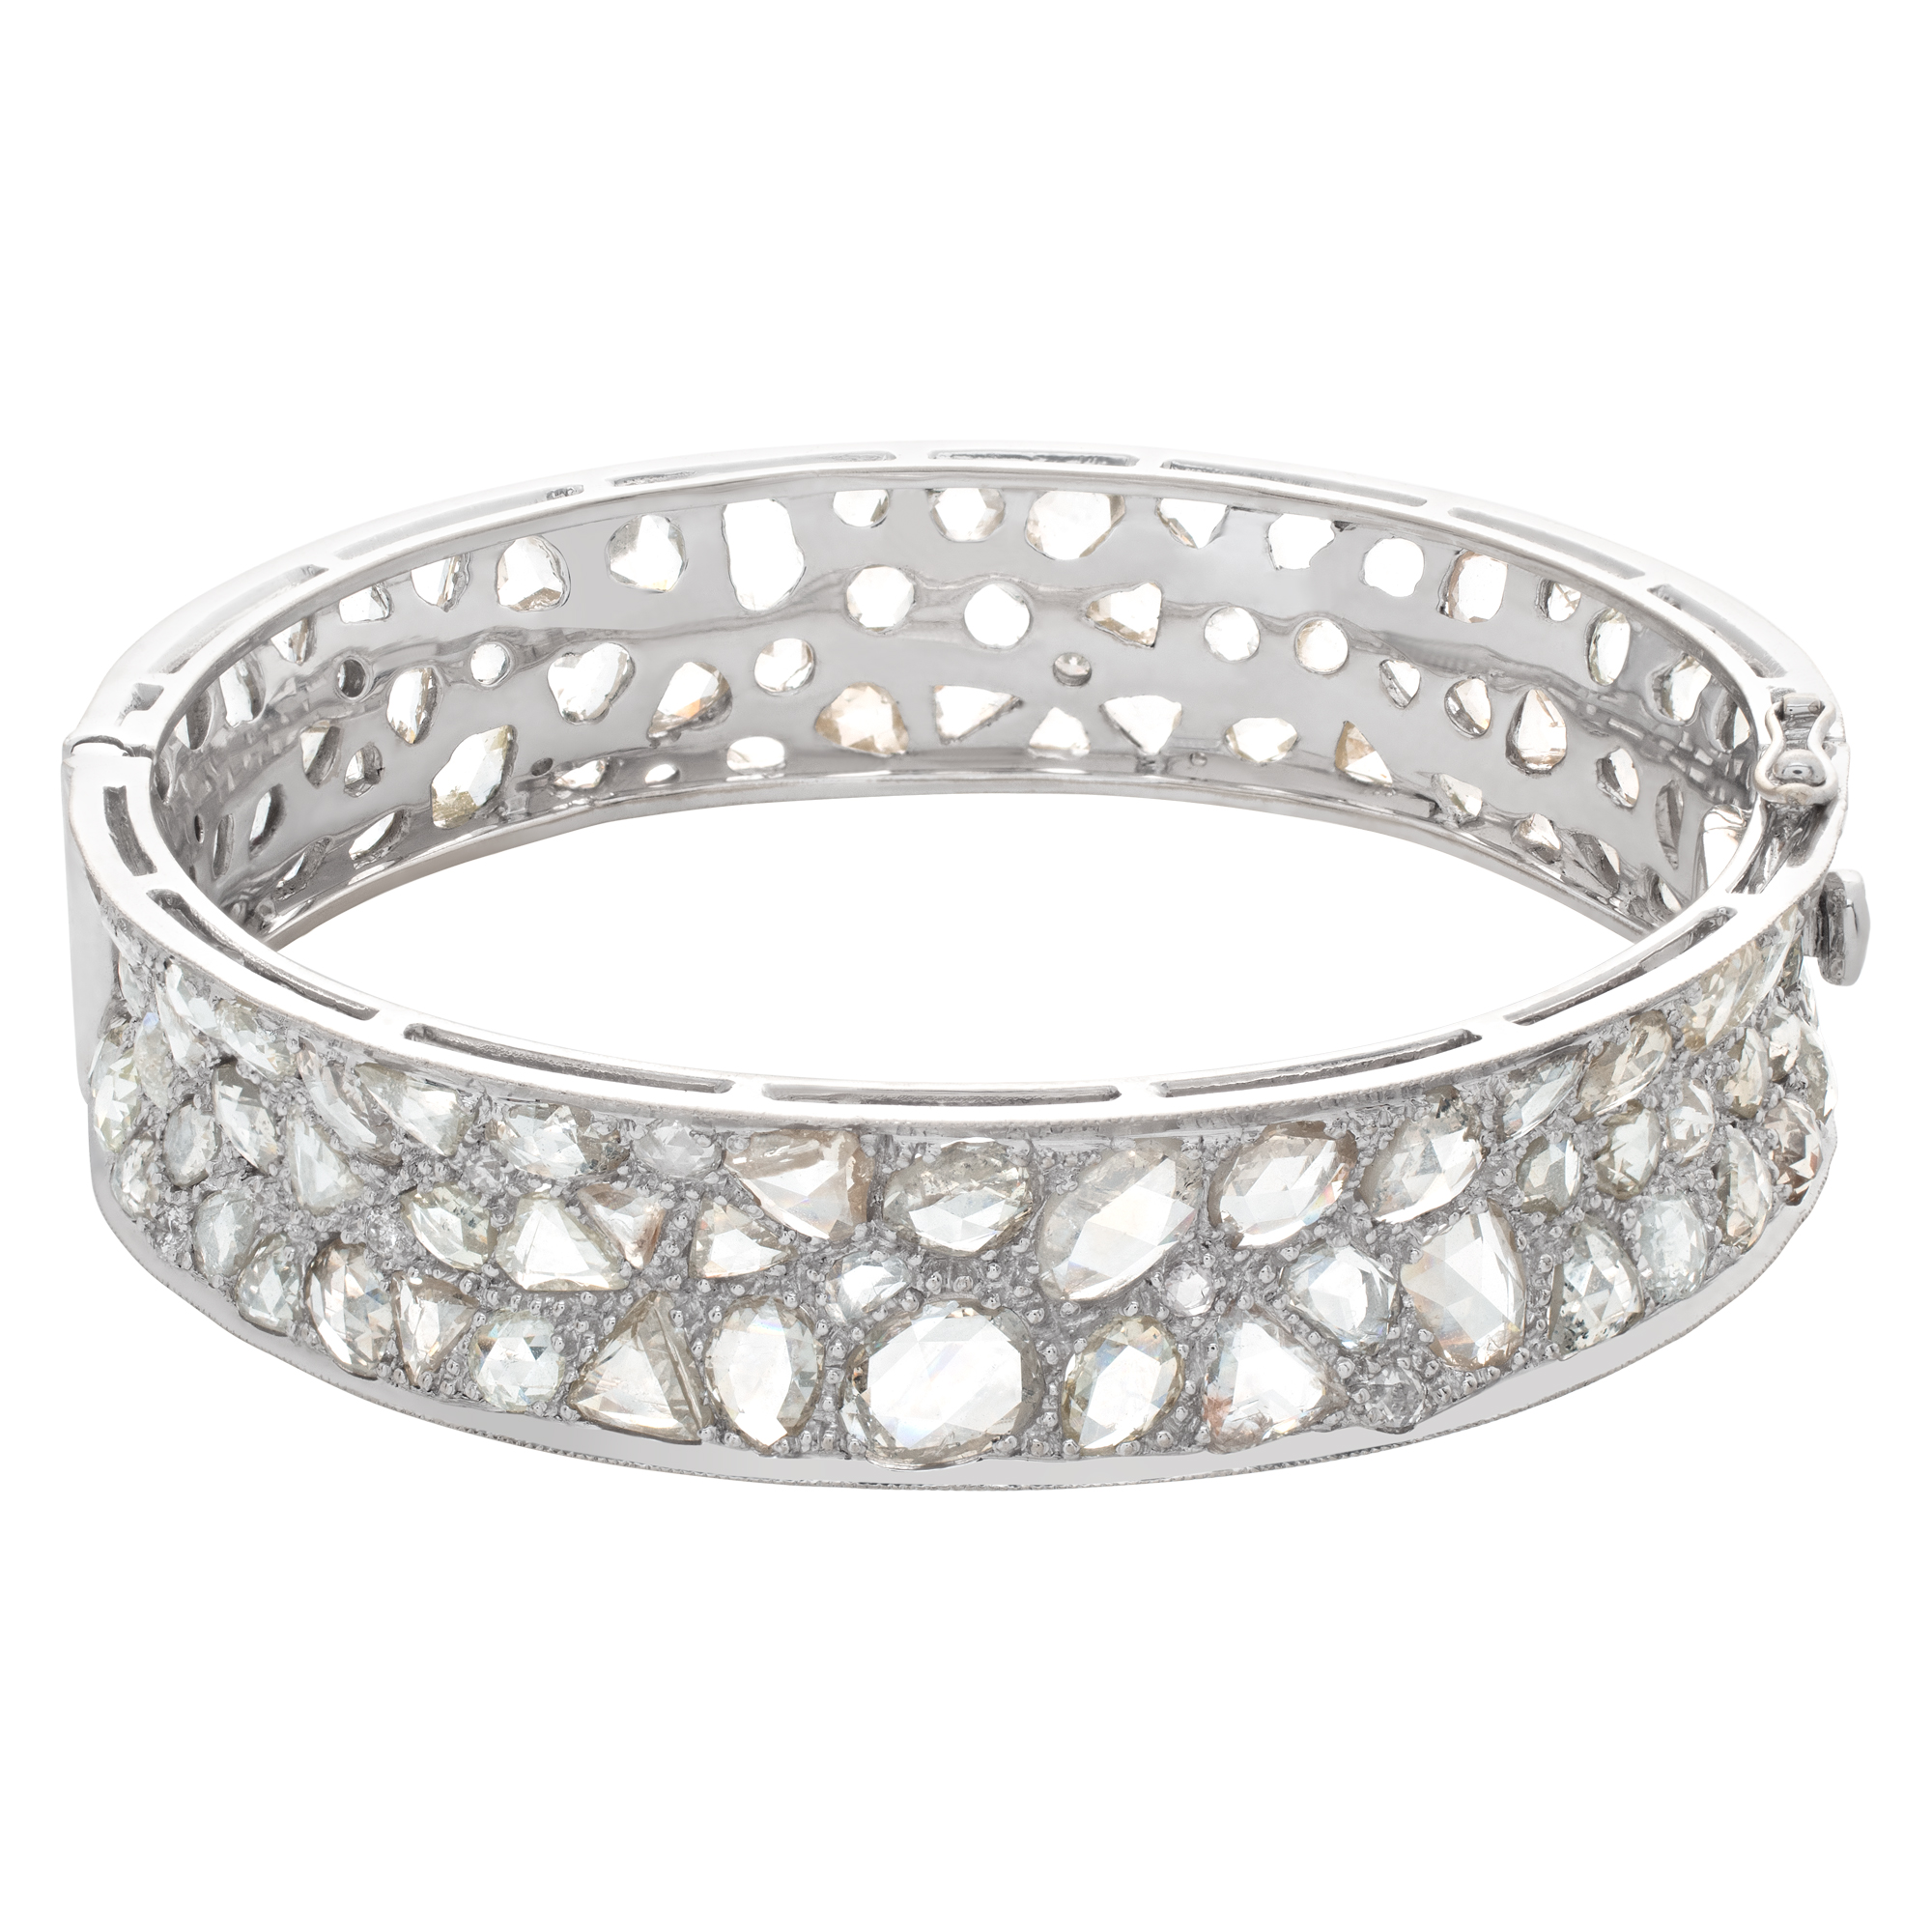 Bangle in 18k white gold with rose cut diamonds (Stones)